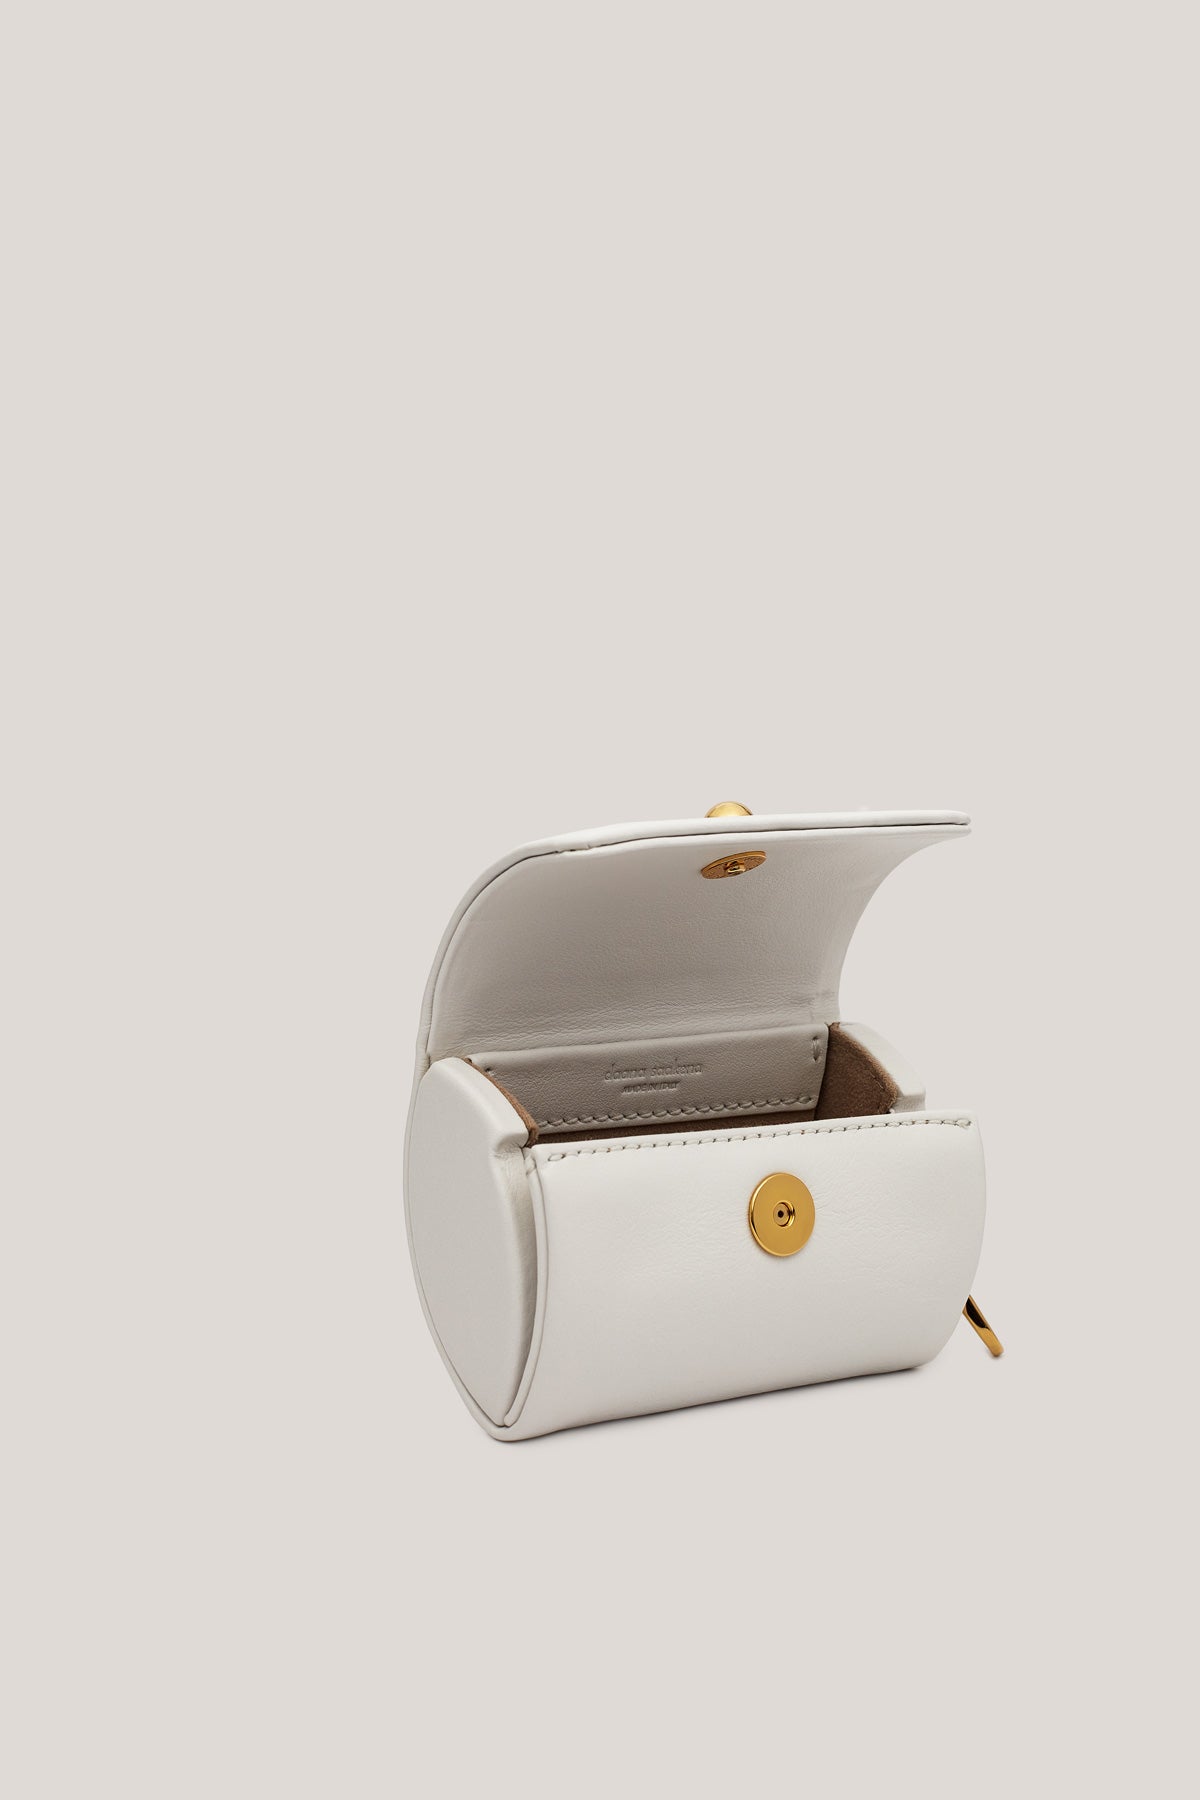 Didi bianco is an elegant, luxury and quality white wallet